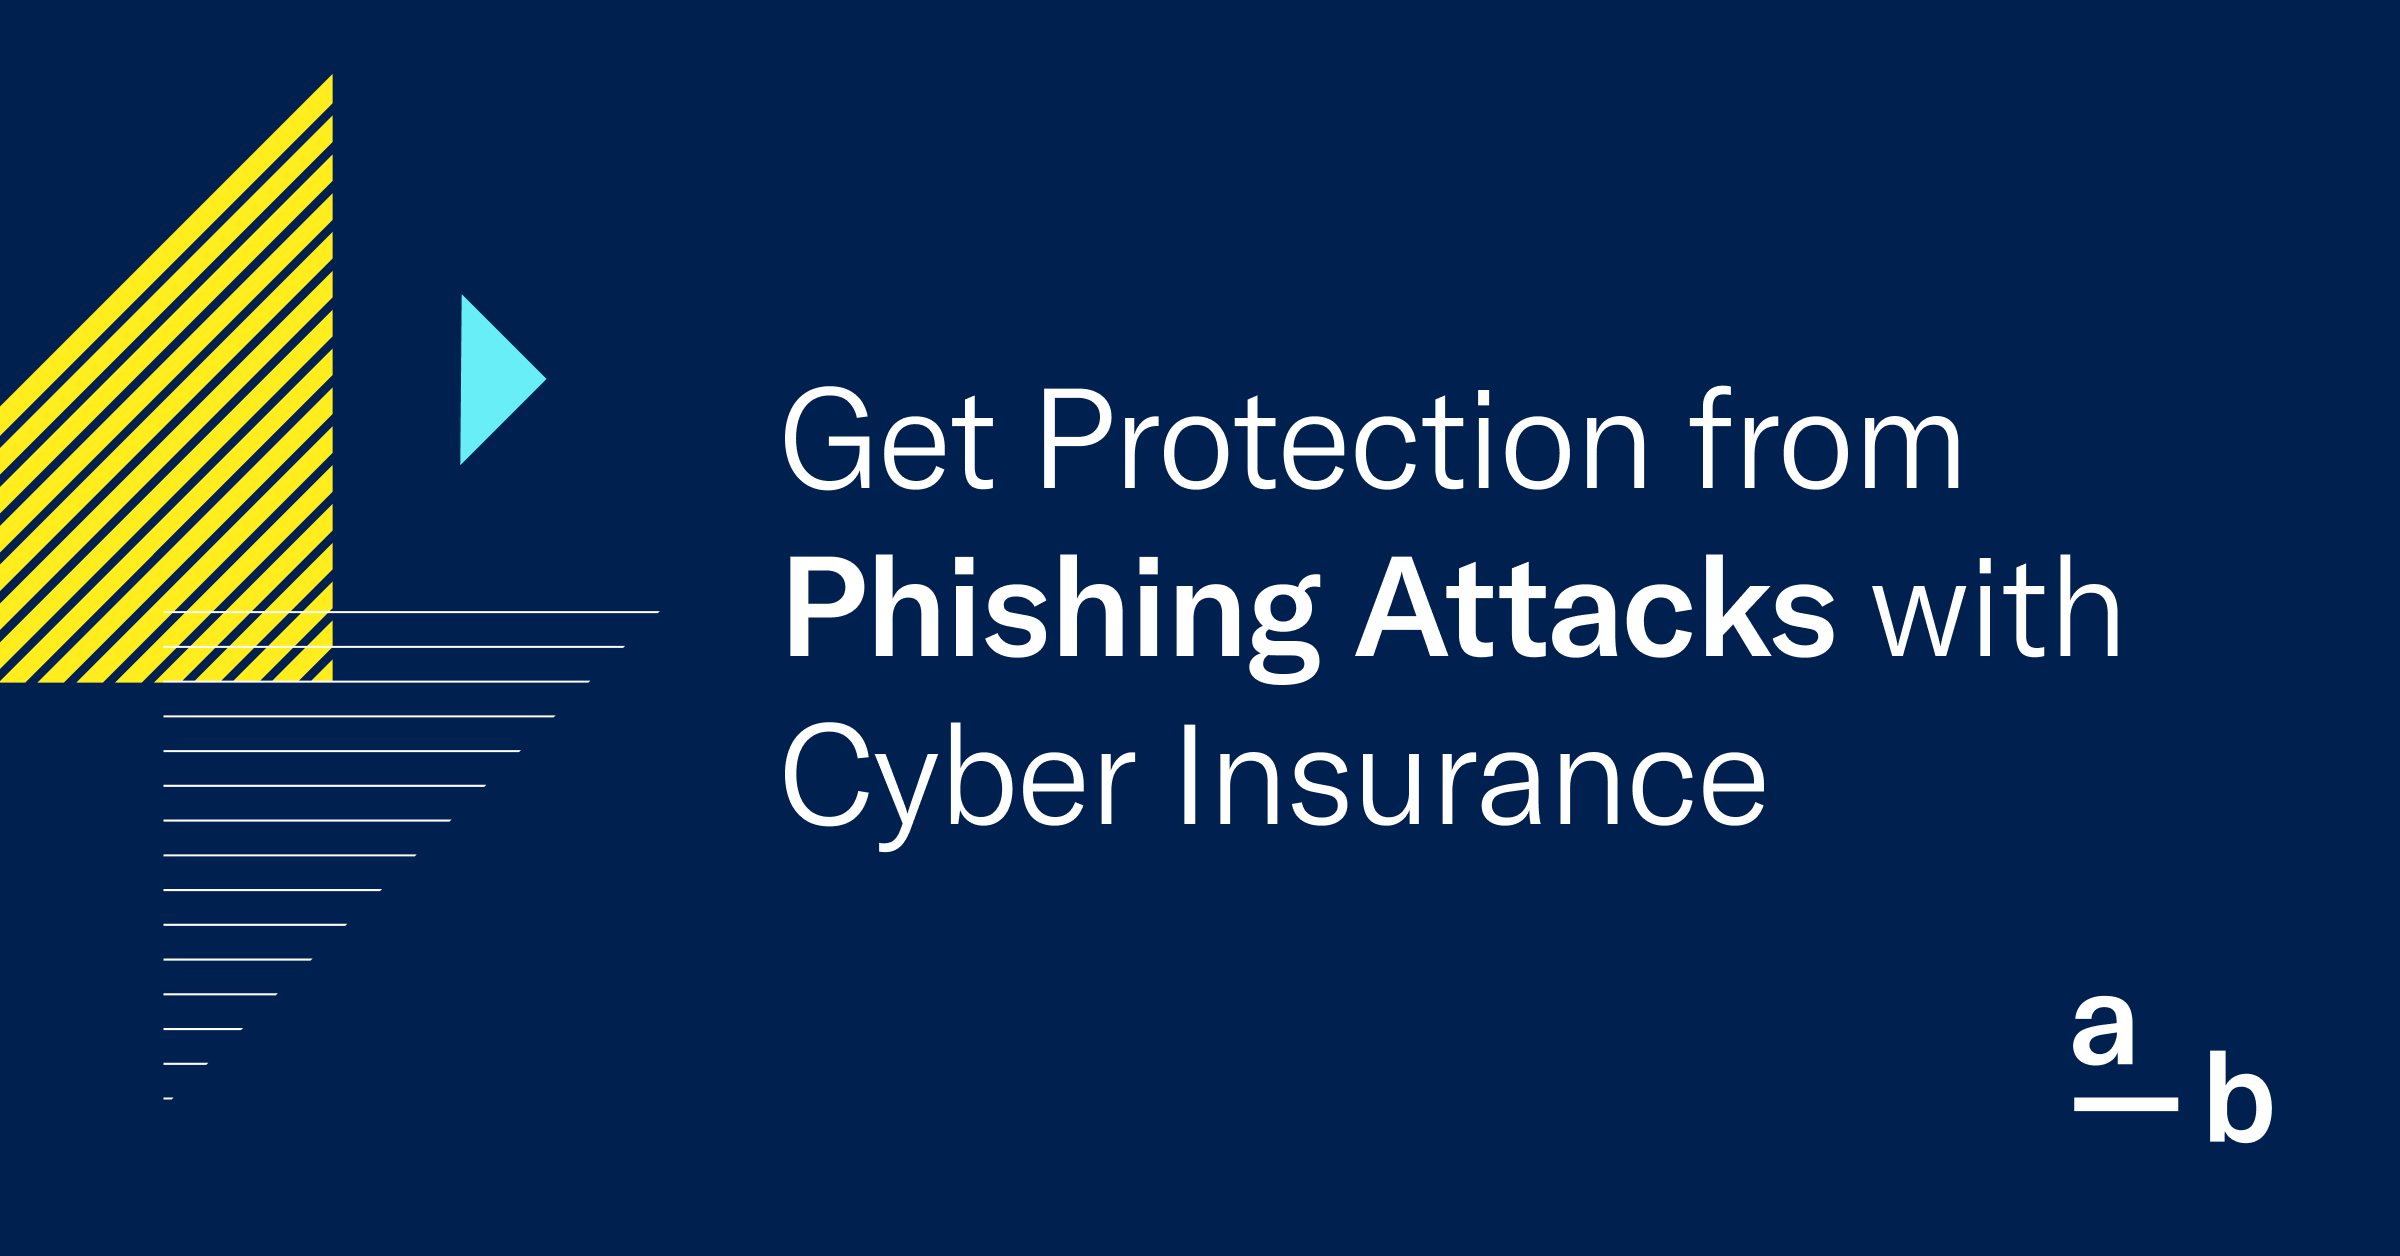 Get Protection from Phishing Attacks with Cyber Insurance